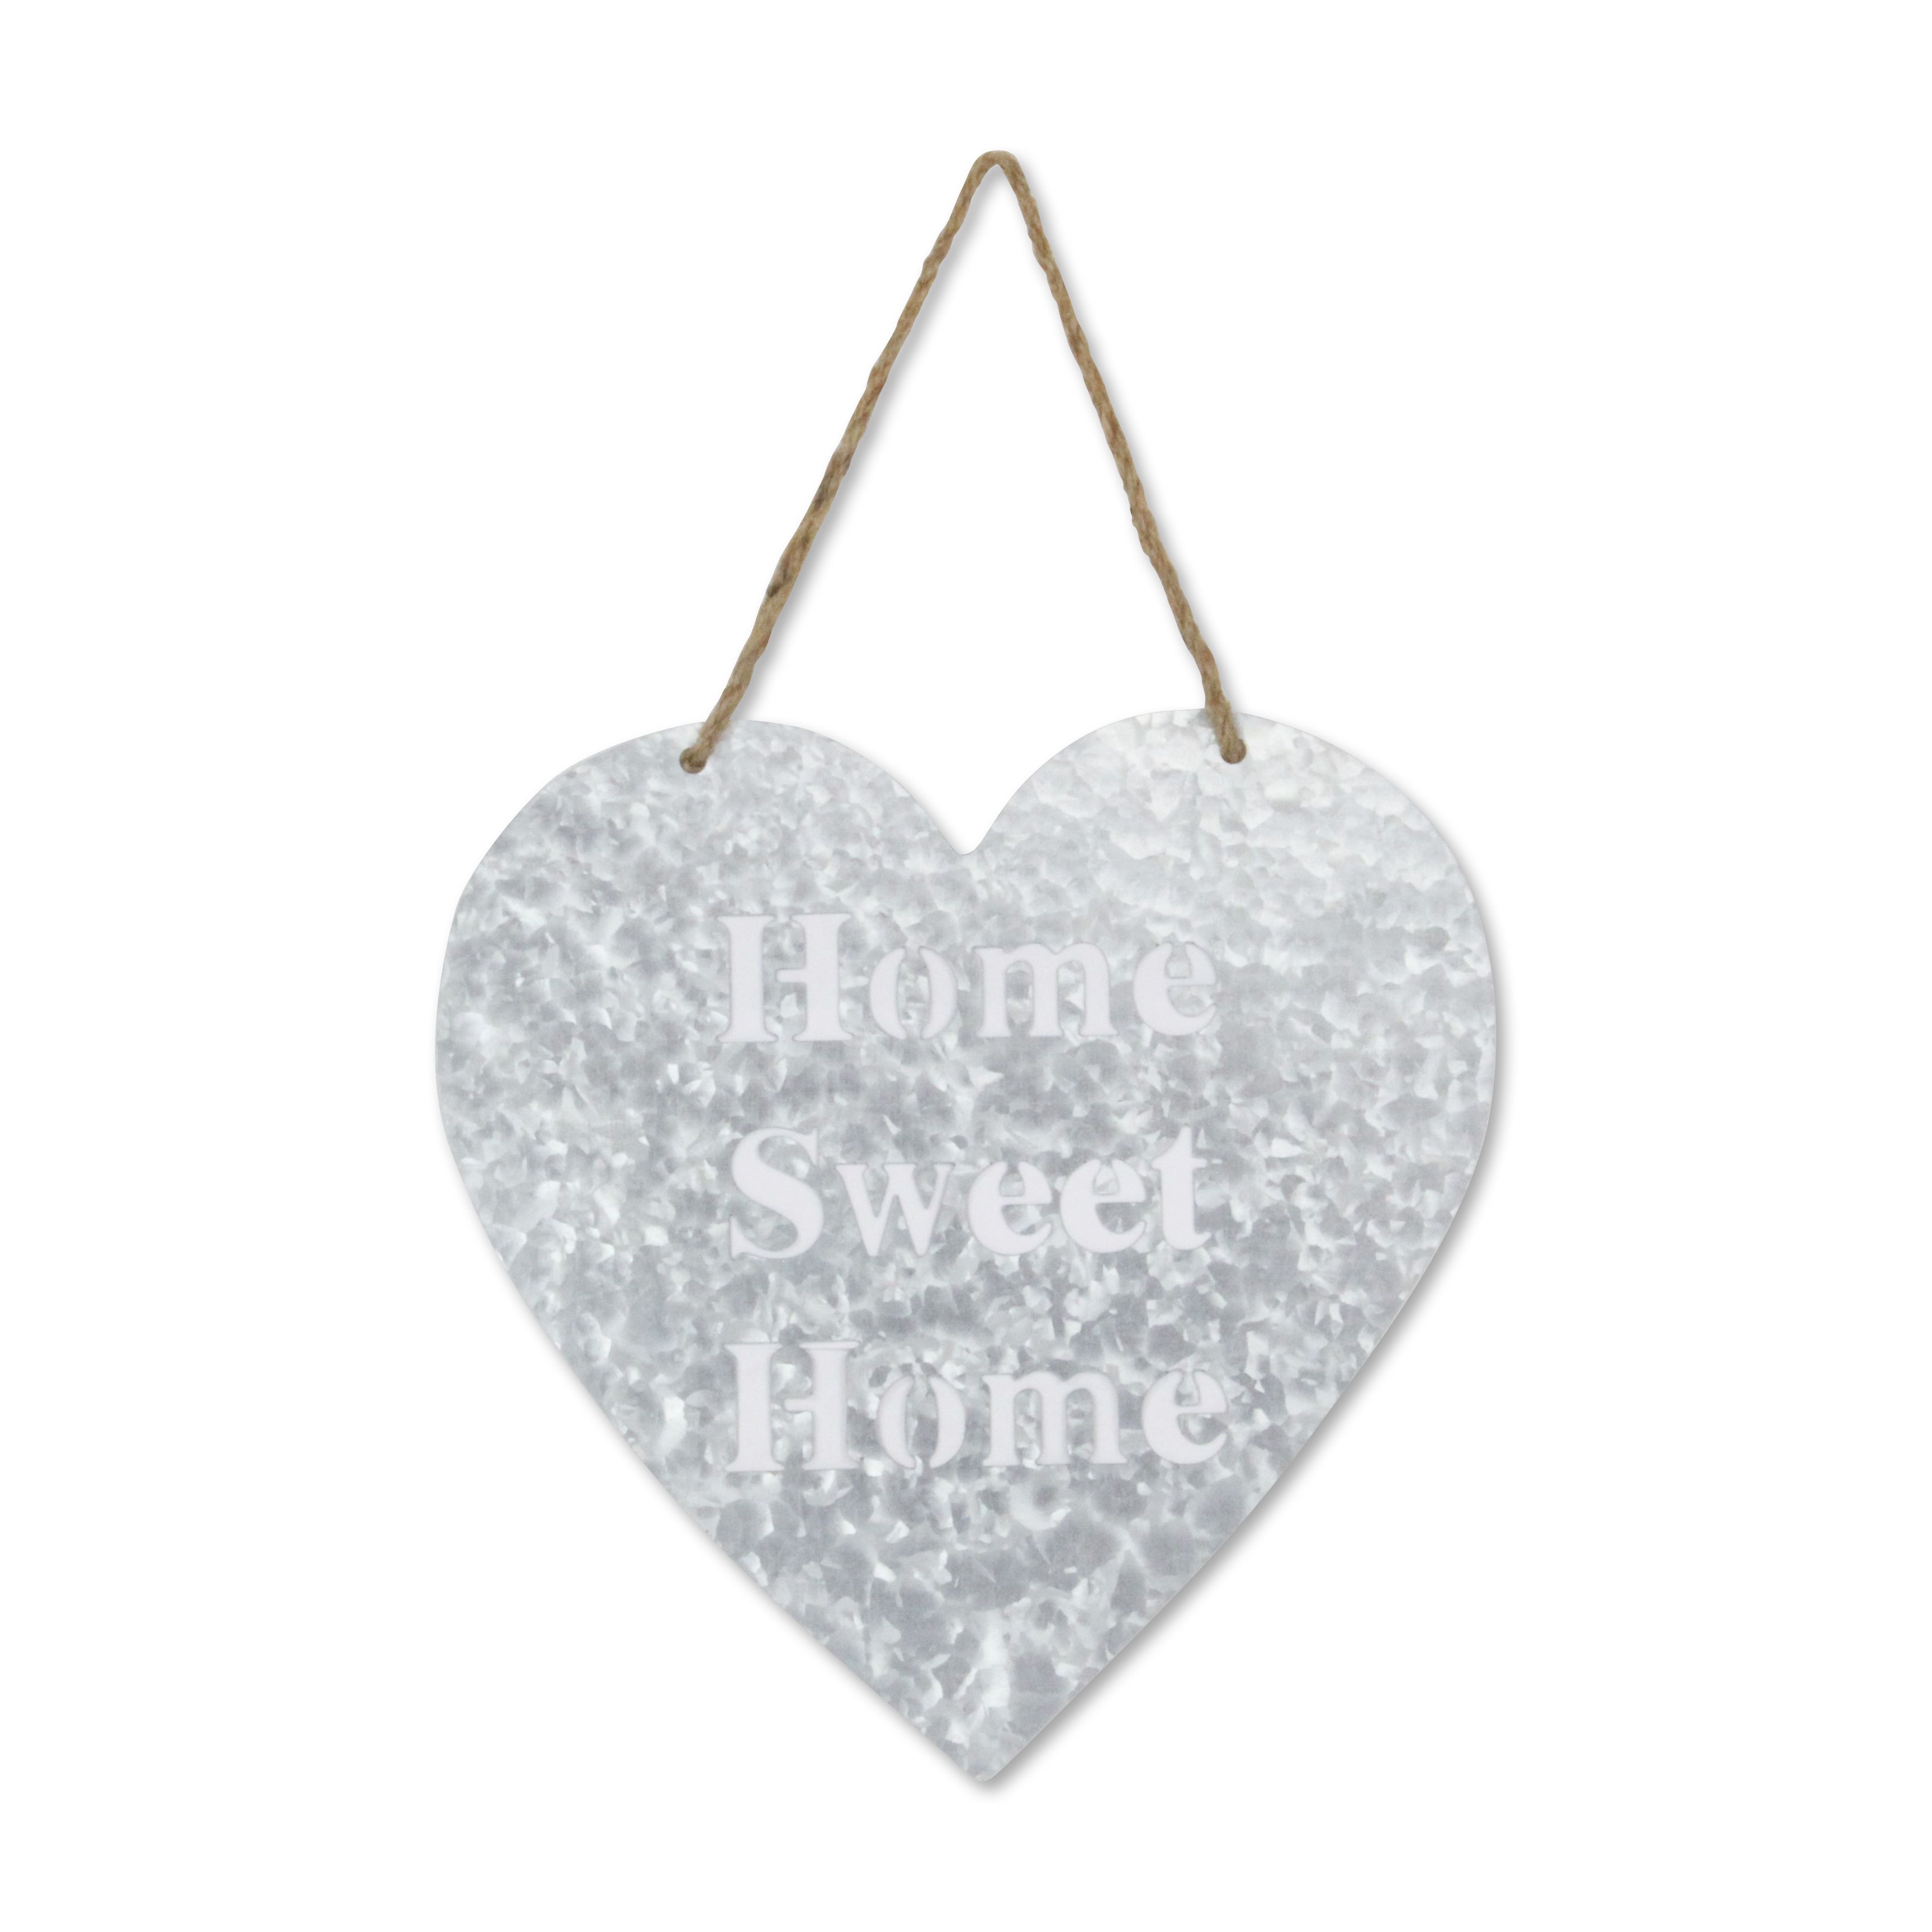 Fp-4052a Heart Shaped Metal Wall Sign Inscribed - Home Sweet Home